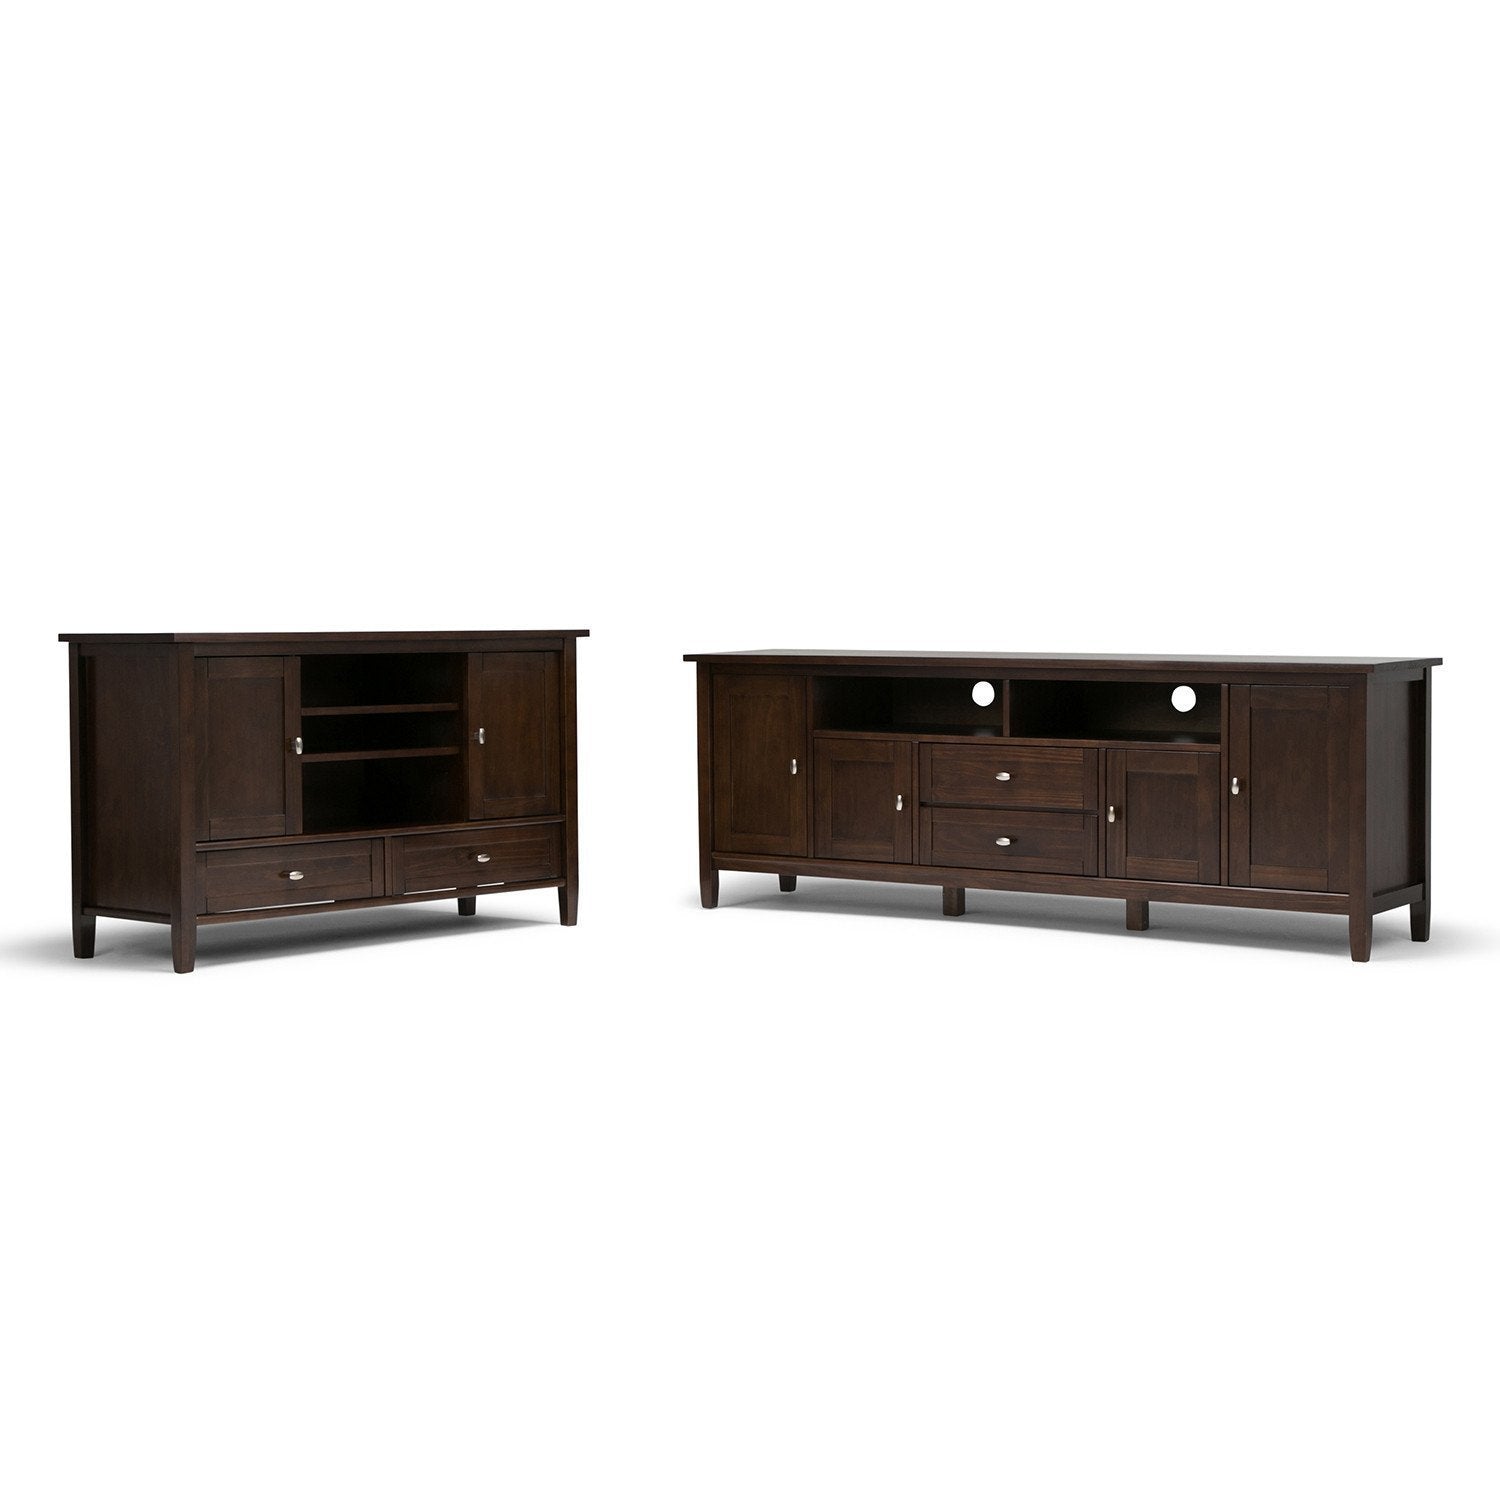 Tobacco Brown | Warm Shaker 72 inch TV Stand